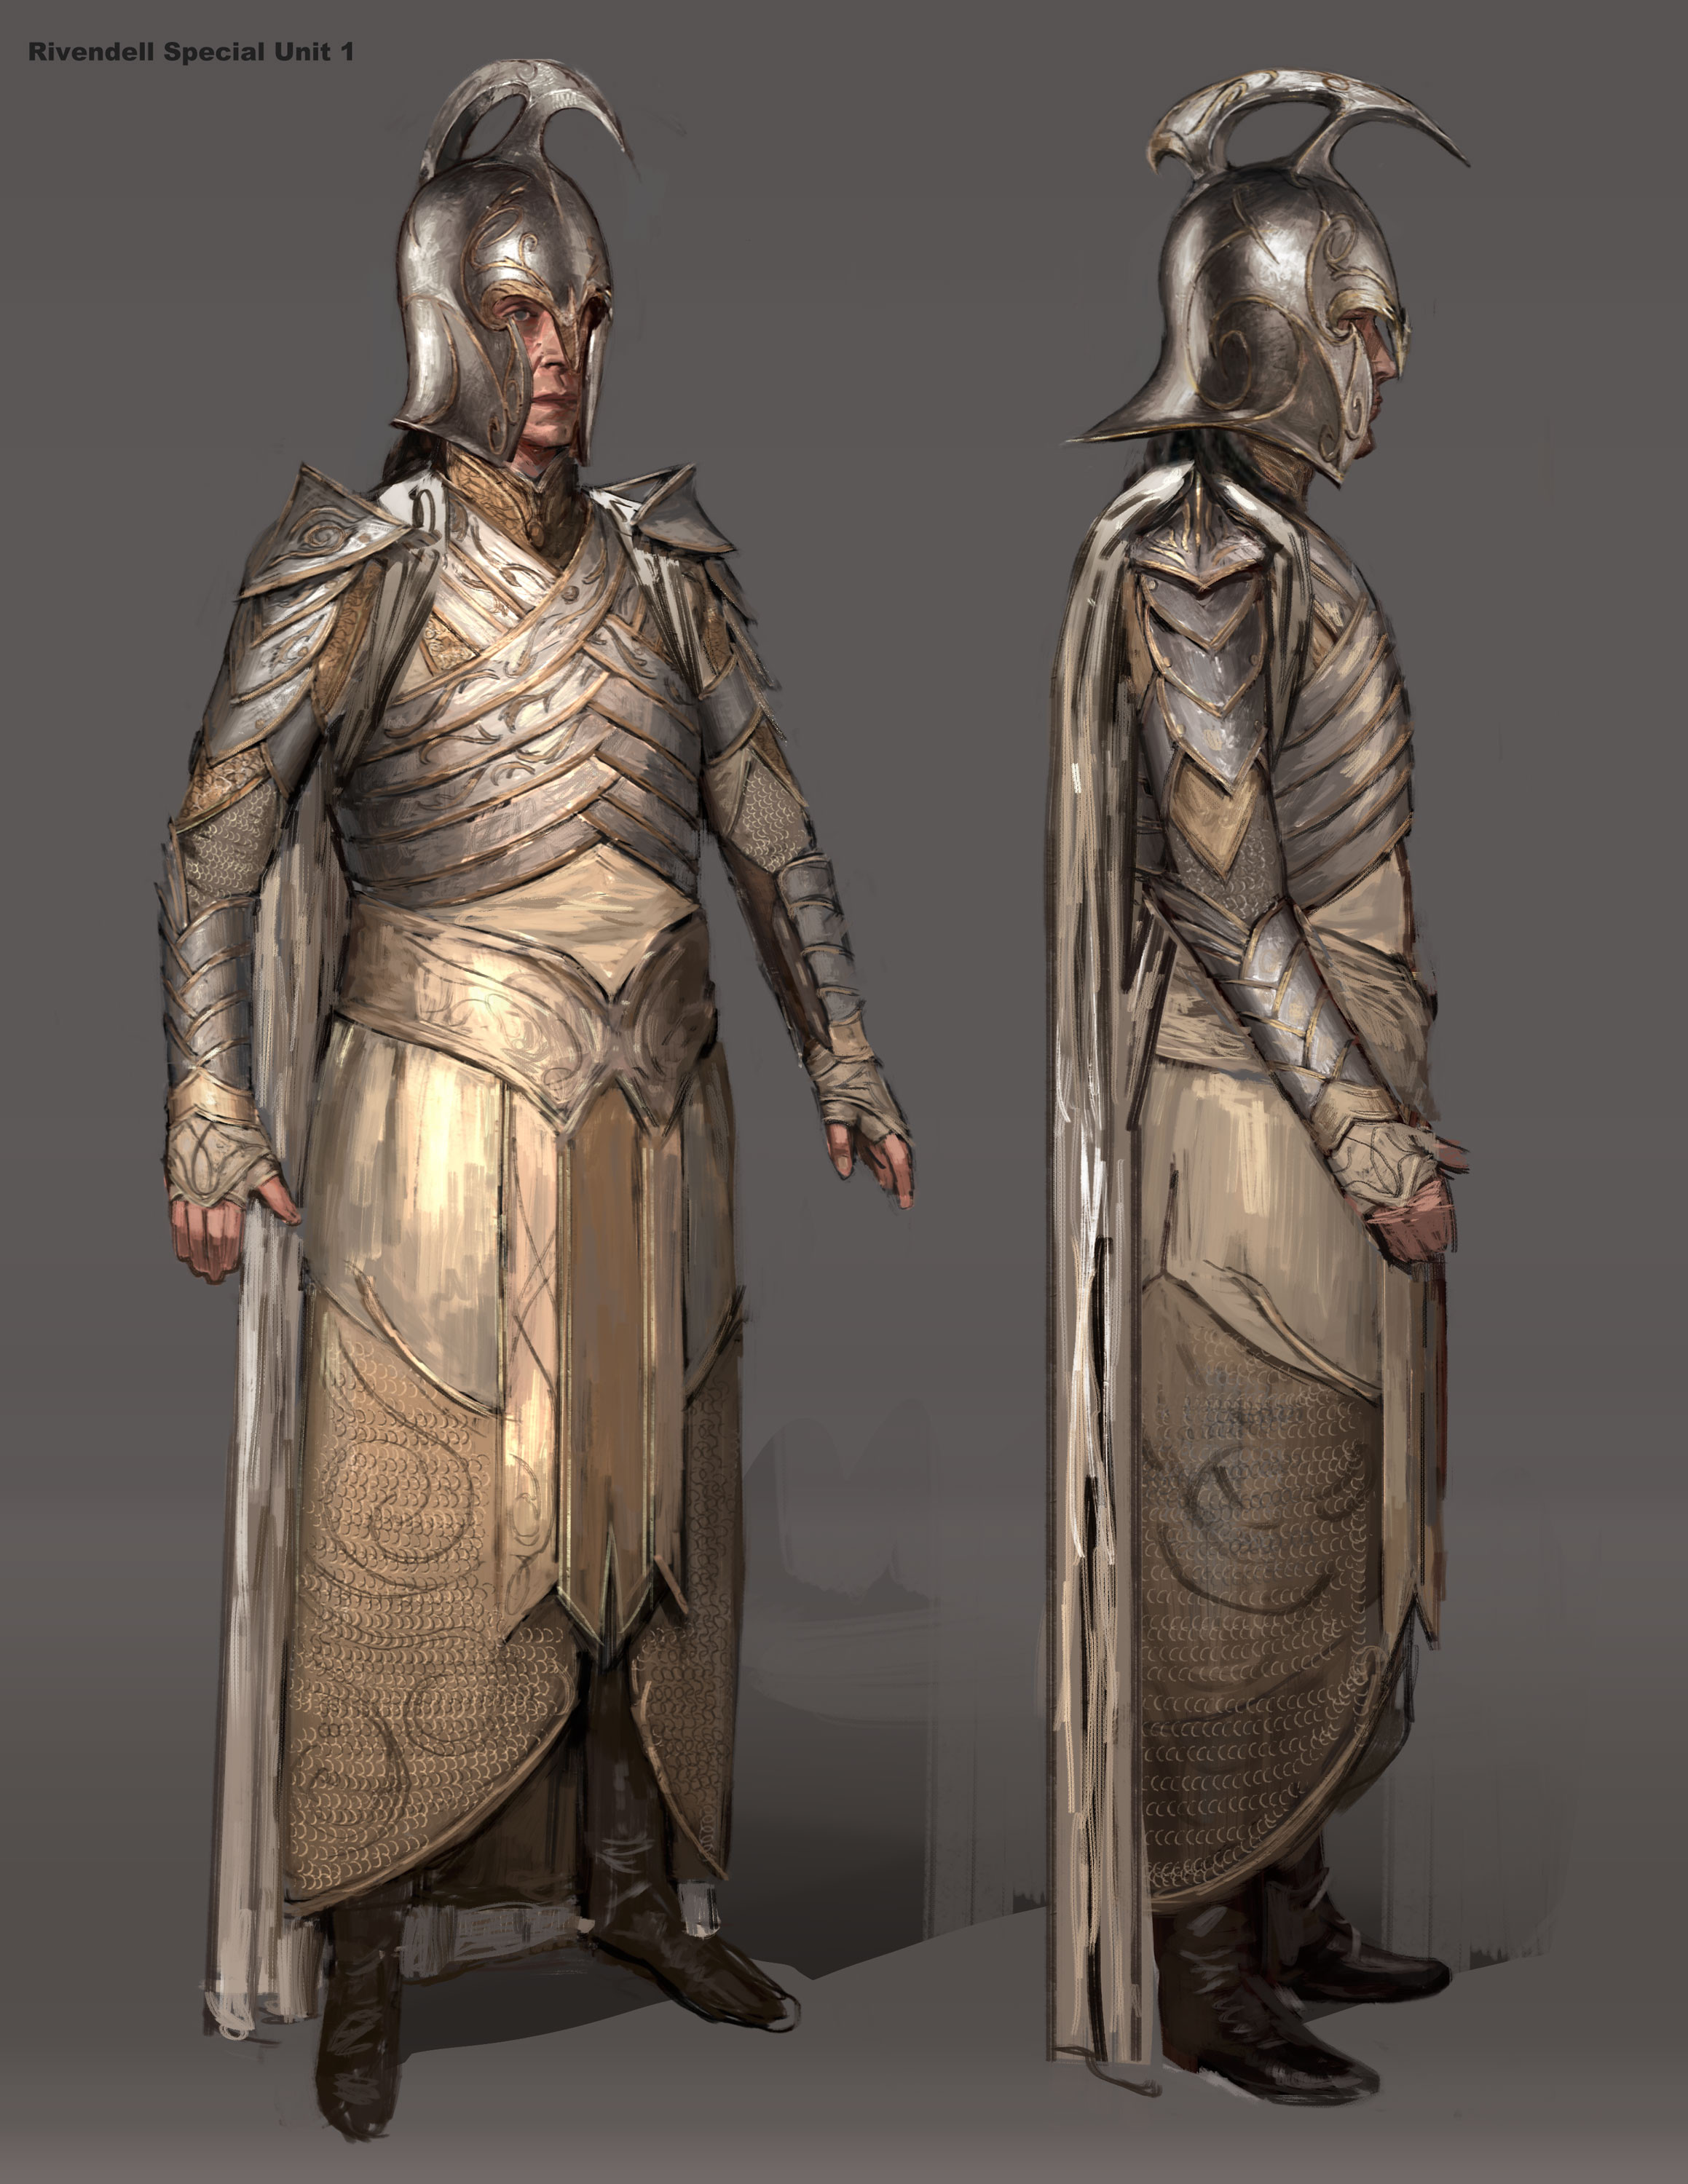 Rivendell special unit. Was tasked with creating a new outfit for a higher class warrior for the Rivendell faction. Inspired by concepts from the game Middle earth: Shadow of Mordor (2014).